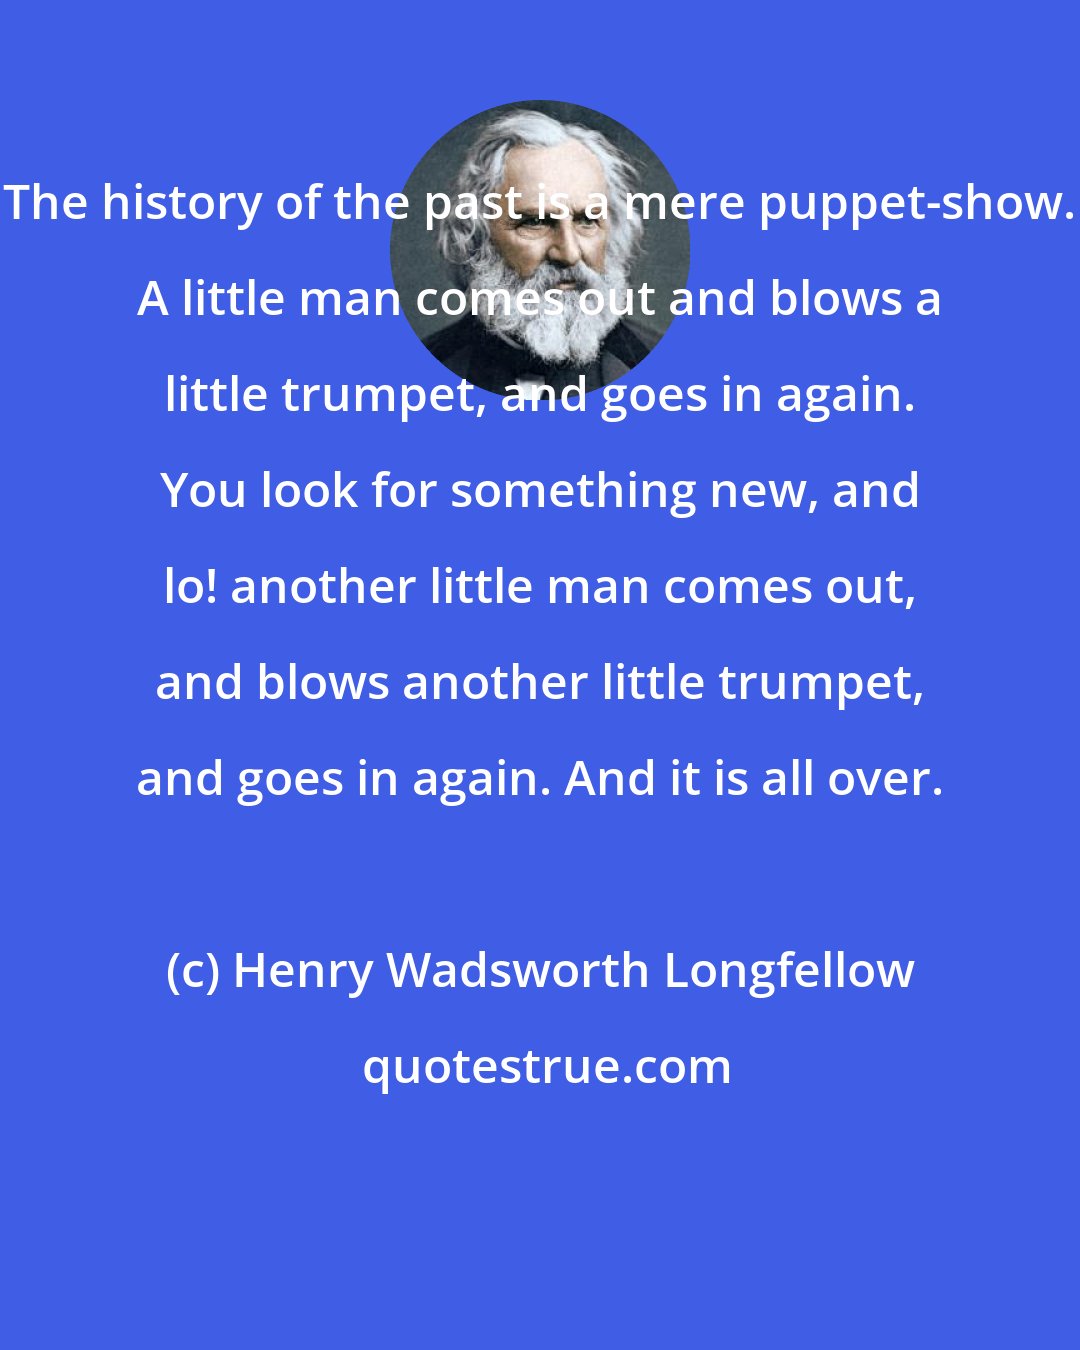 Henry Wadsworth Longfellow: The history of the past is a mere puppet-show. A little man comes out and blows a little trumpet, and goes in again. You look for something new, and lo! another little man comes out, and blows another little trumpet, and goes in again. And it is all over.